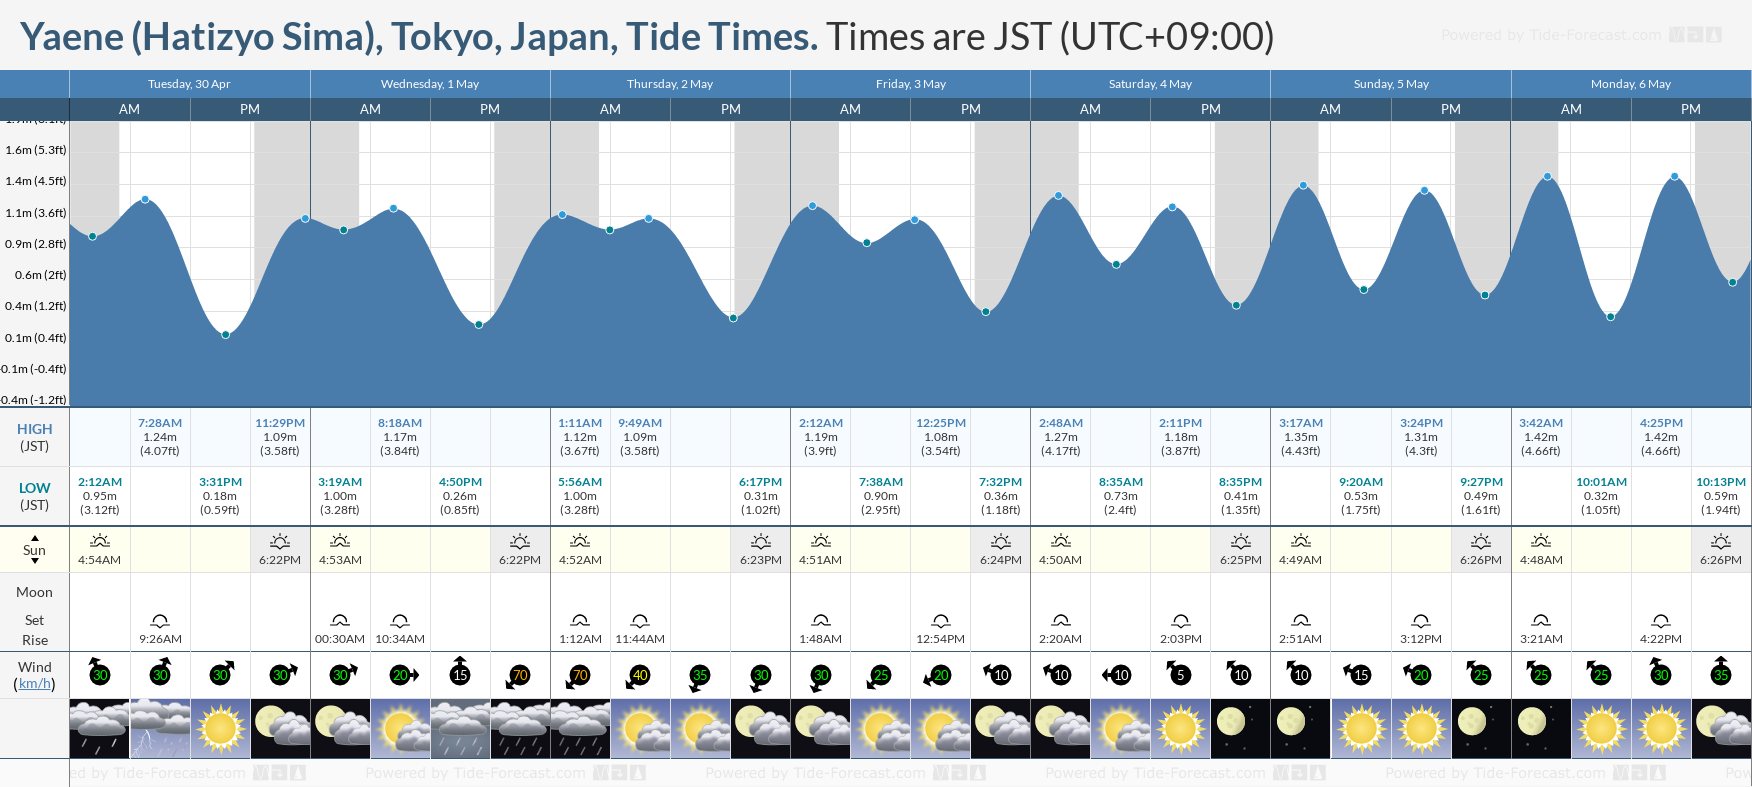 Yaene (Hatizyo Sima), Tokyo, Japan Tide Chart including high and low tide tide times for the next 7 days